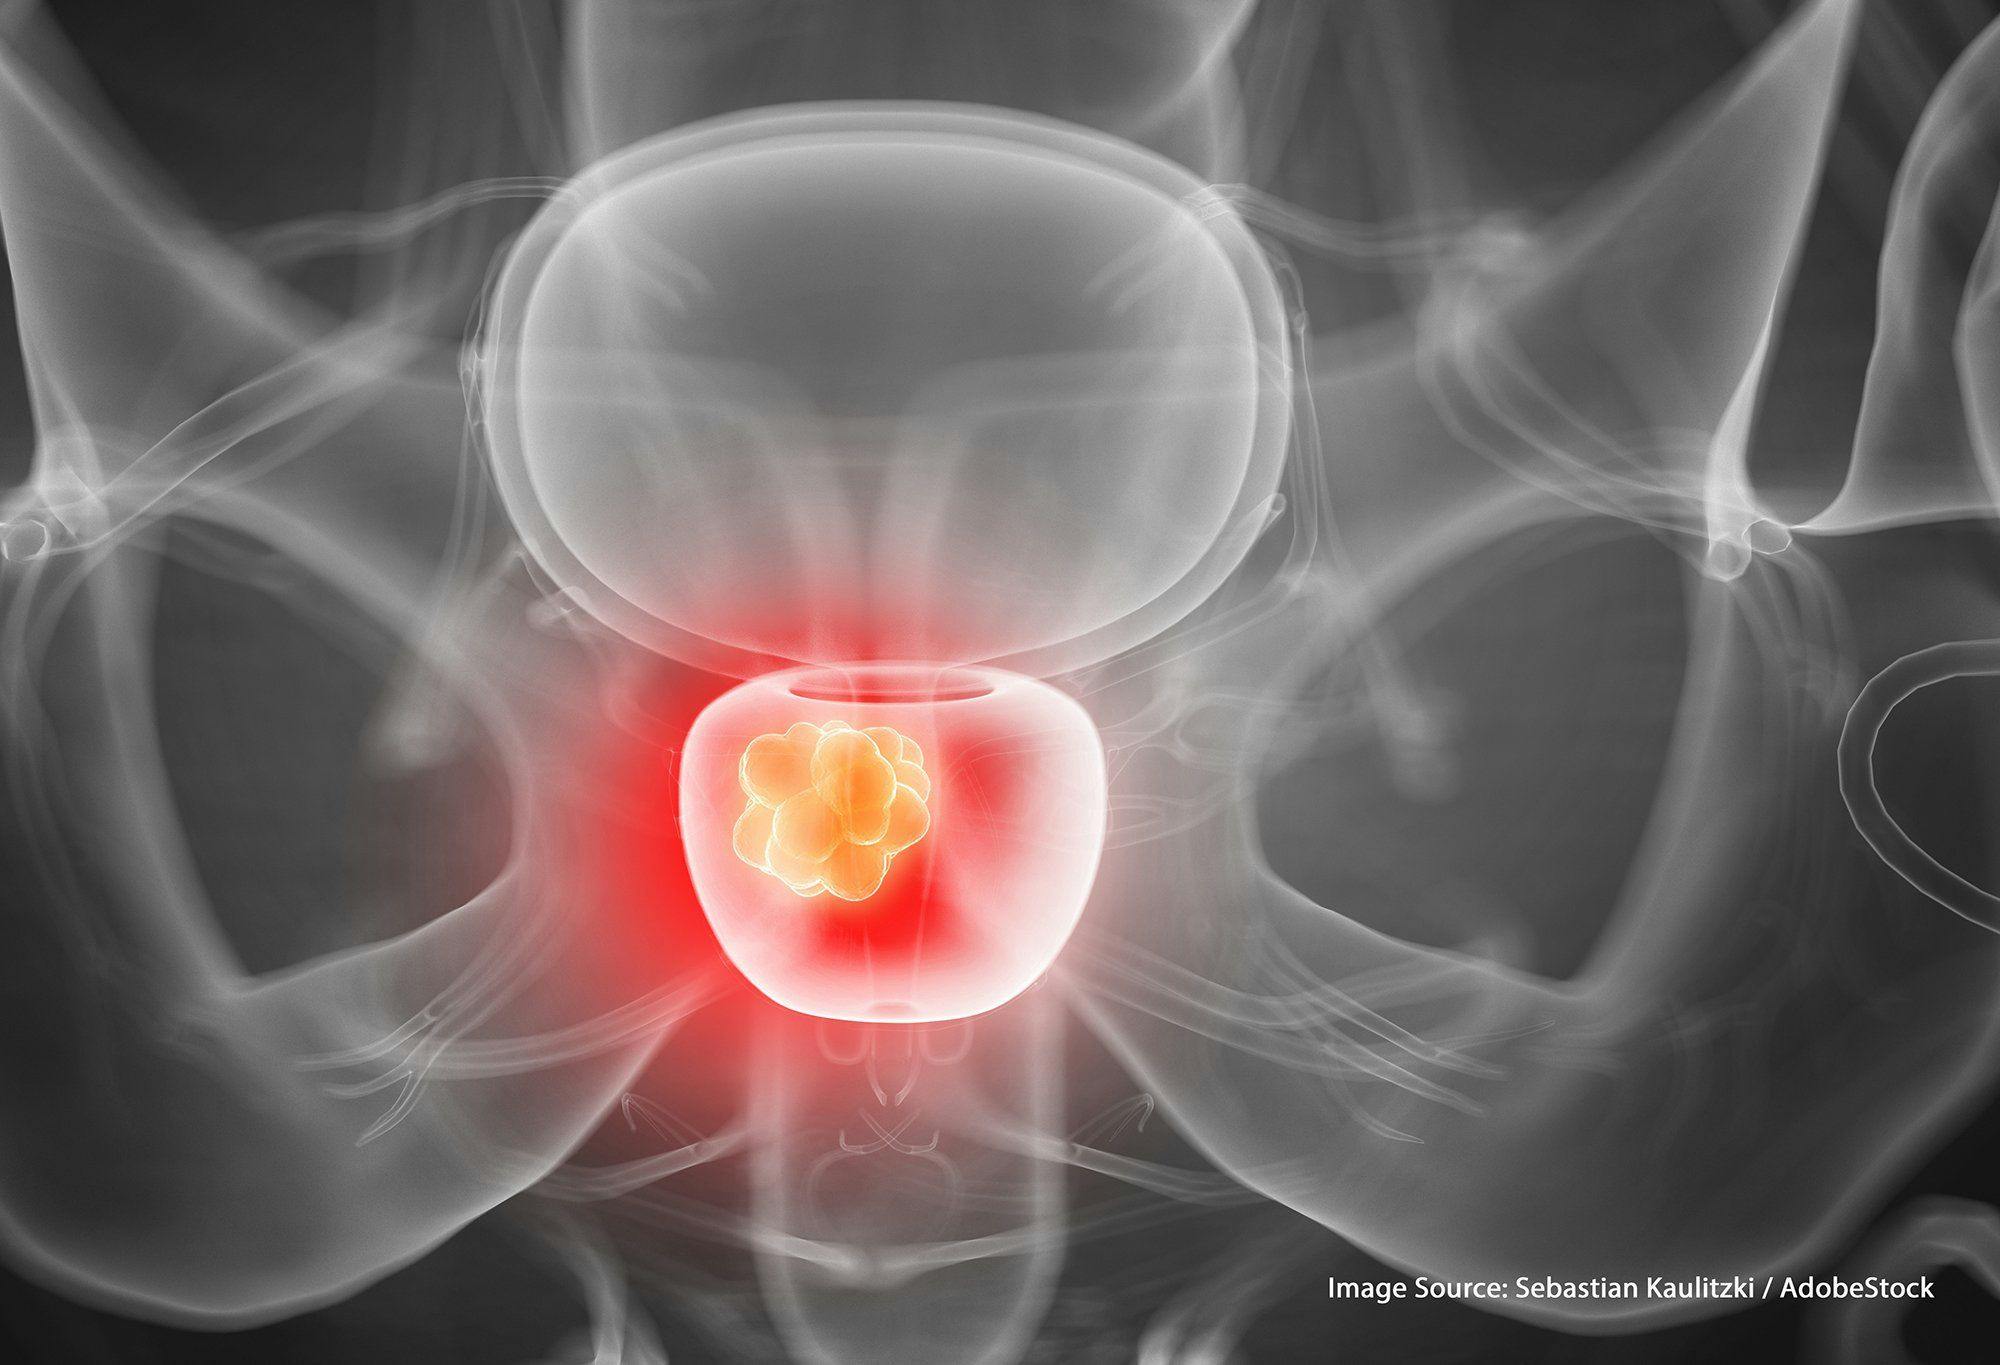 ARCHES Trial “Changes Practice” for Metastatic Hormone-Sensitive Prostate Cancer